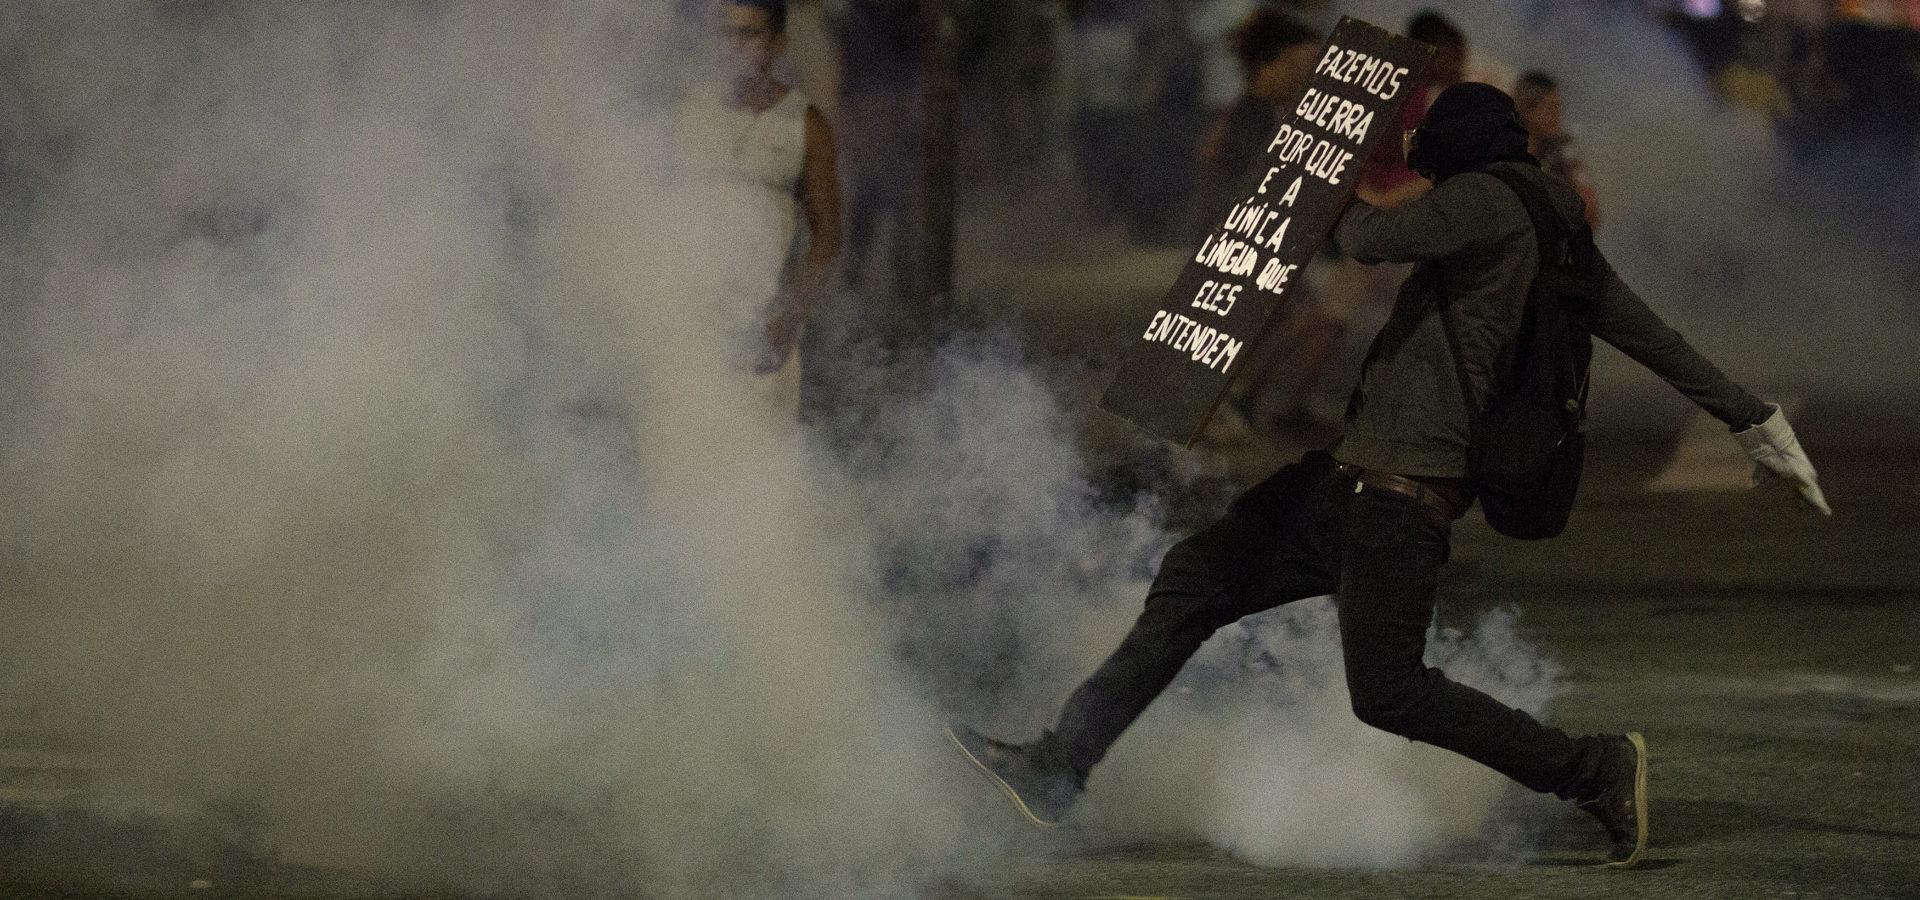 Holding a shield covered with the Portuguese message: "We make war because is the only language they understand," a demonstrator runs amid tear gas during a demonstration against proposed austerity measures in Rio de Janeiro, Brazil, Wednesday, March 15, 2017. People protested across the country against proposed changes to work rules and pensions. (AP/Leo Correa)